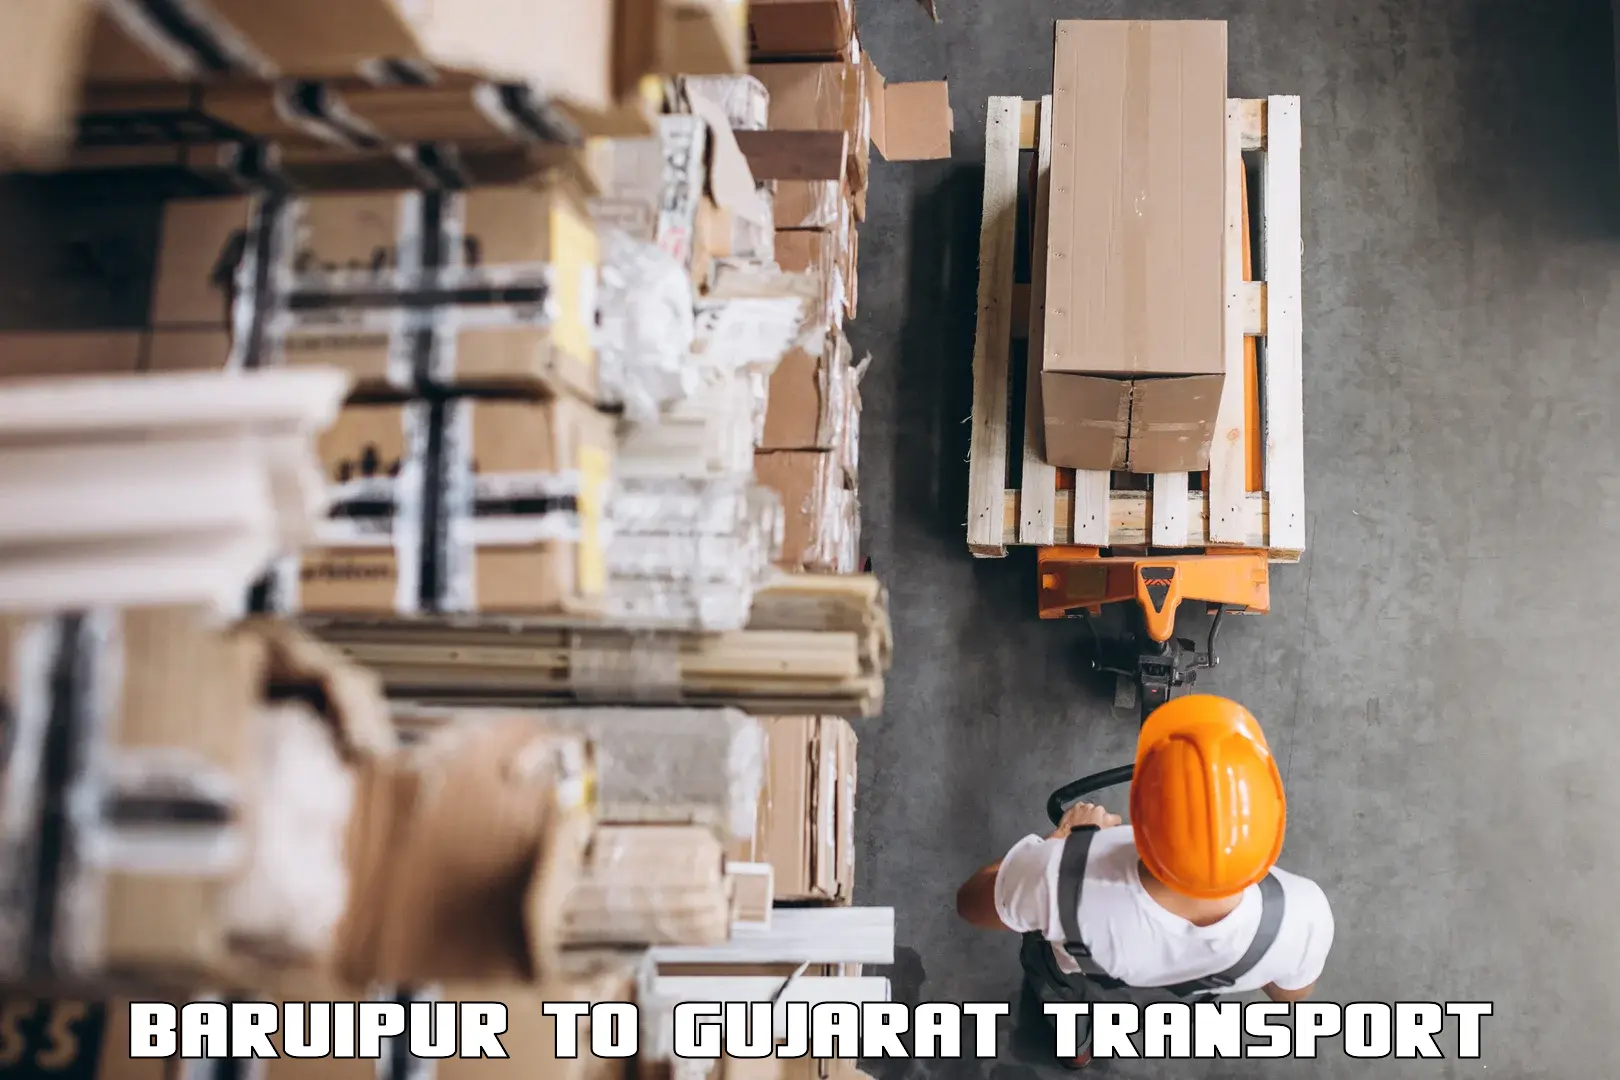 Pick up transport service in Baruipur to Gujarat